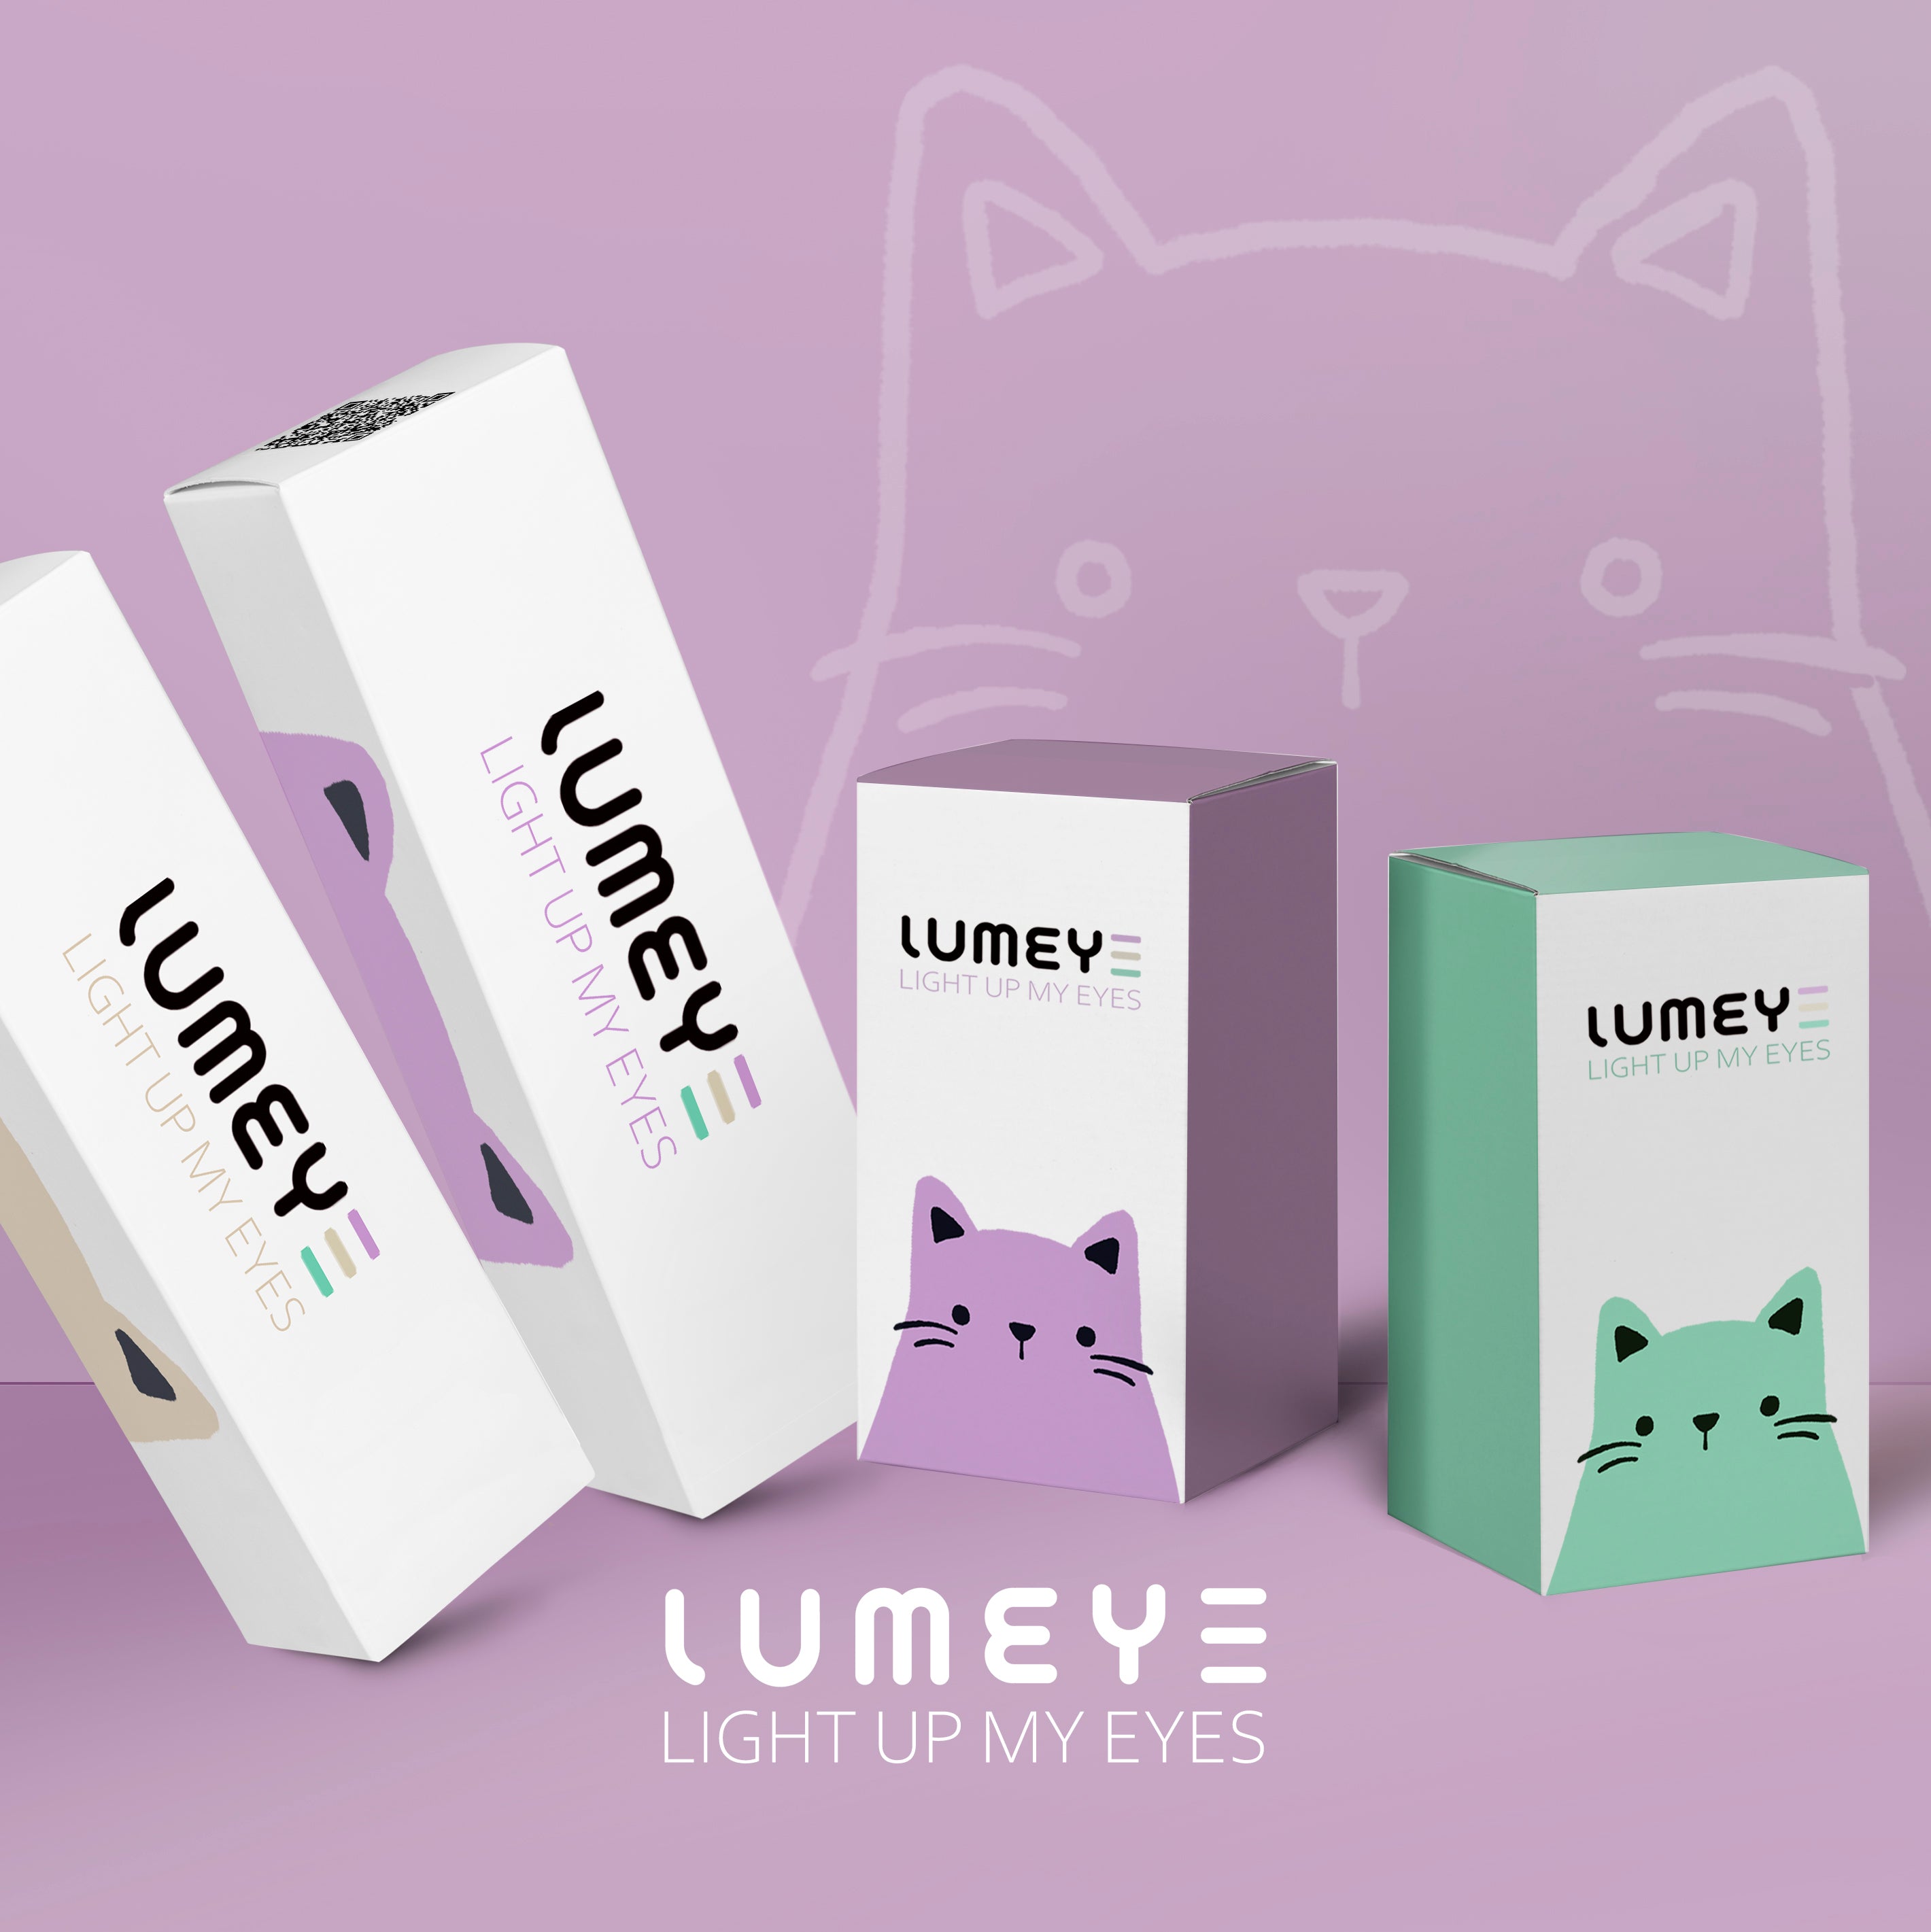 Best COLORED CONTACTS - LUMEYE Dreaminess Blue Colored Contact Lenses - LUMEYE